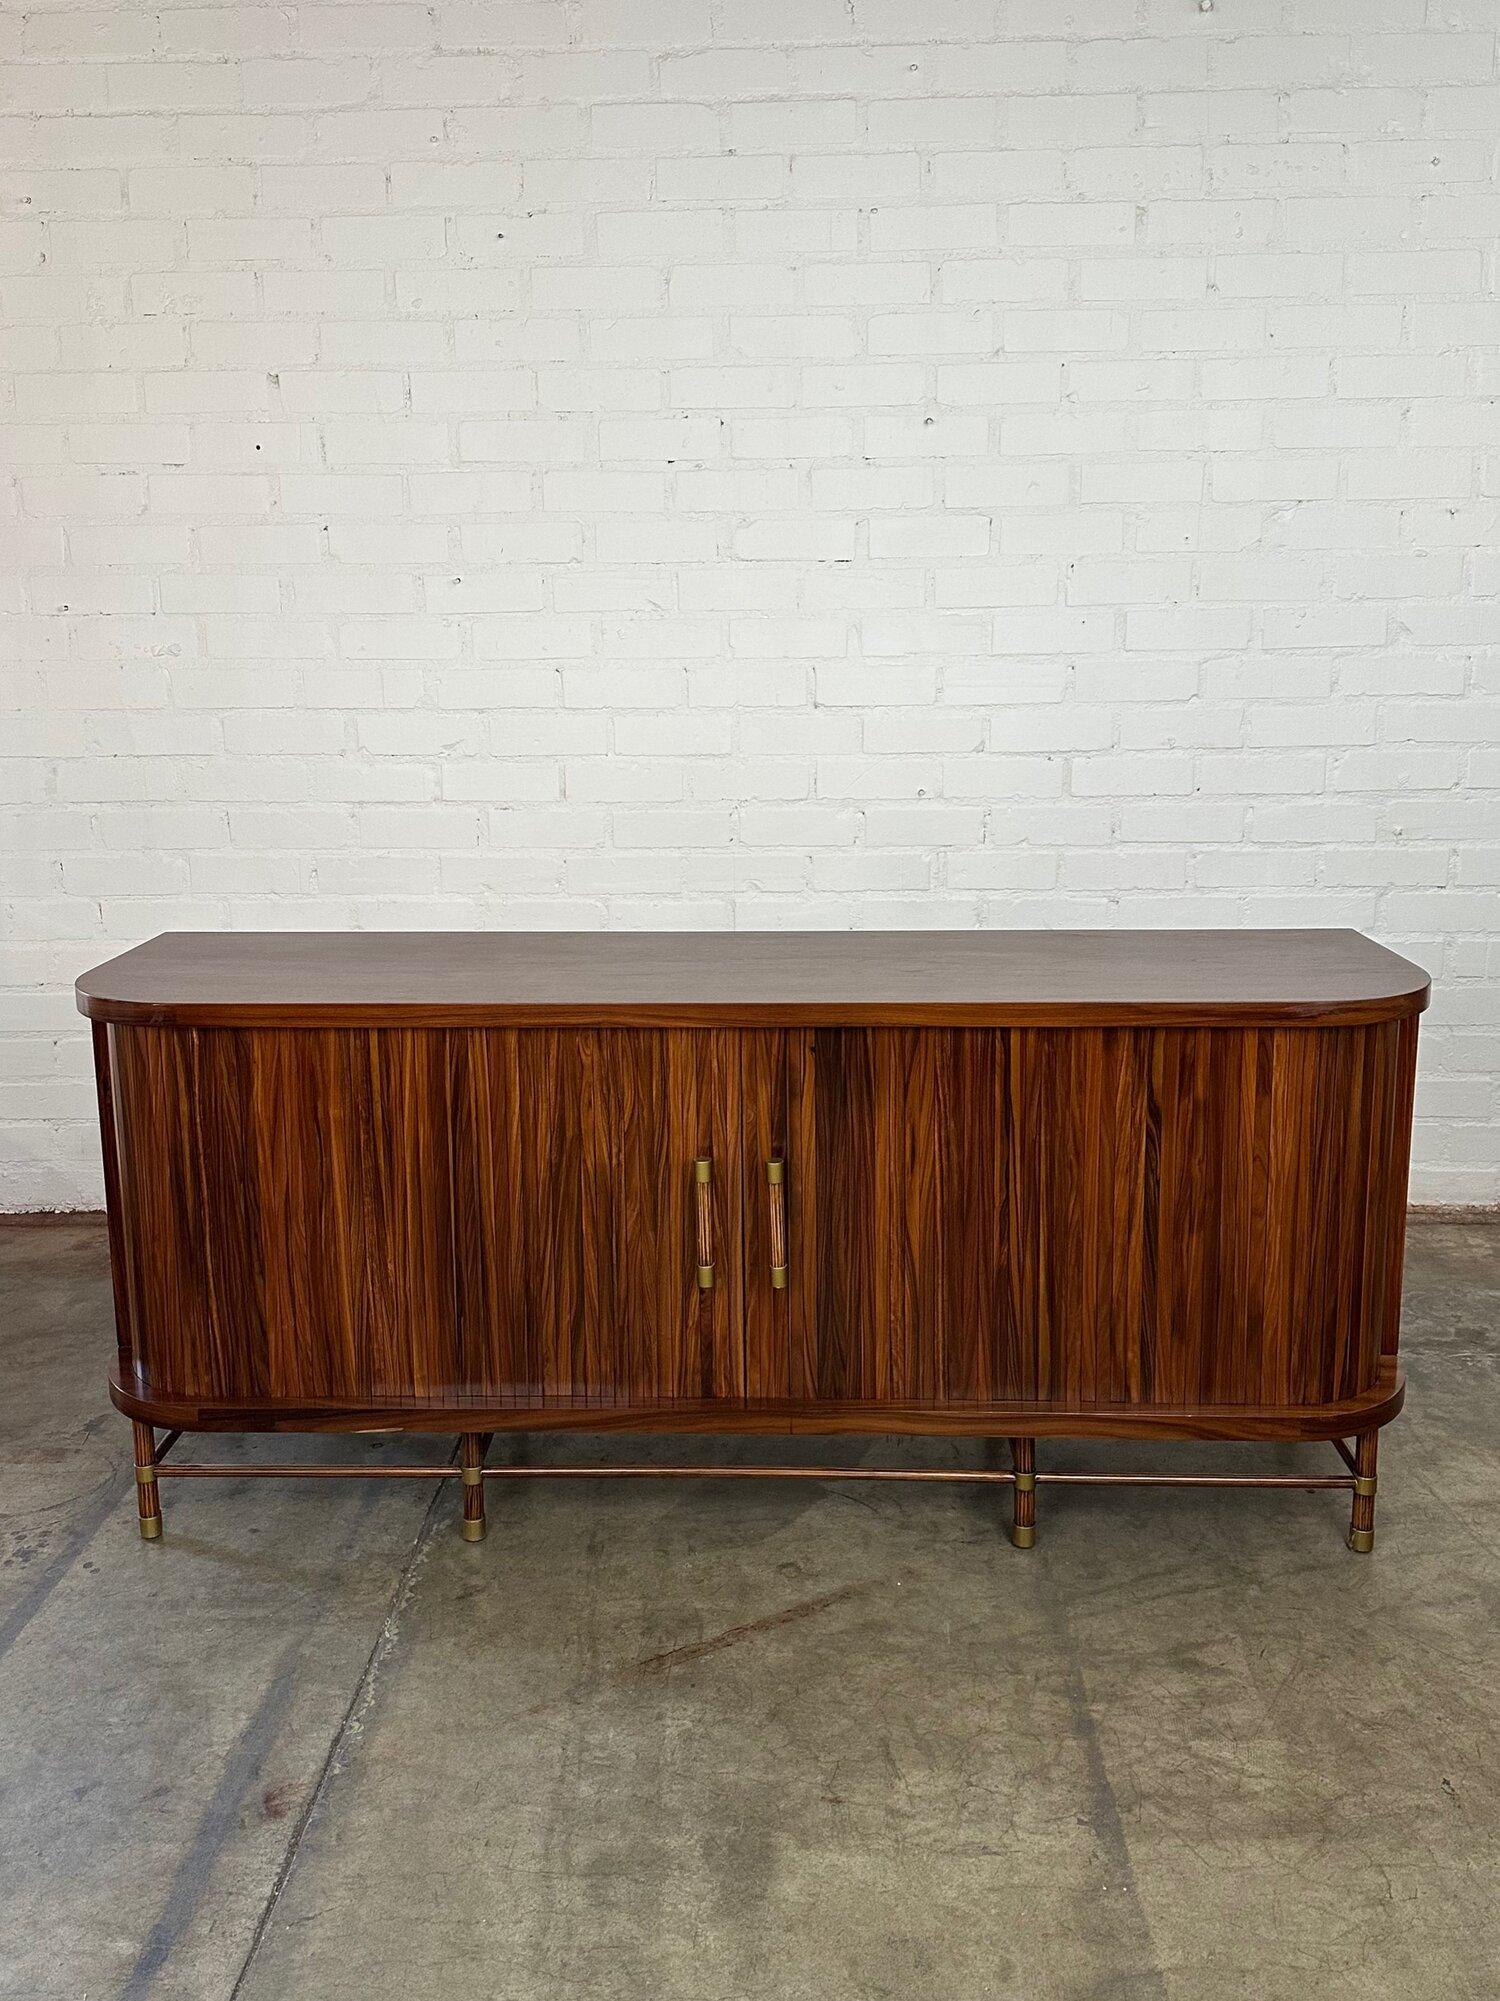 Measures: W76 D20 H32

Well preserved contemporary rosewood credenza. Item is structurally sound, sturdy and fully functional. Credenza features open back sections for wiring and sits on a strong base with cross bar supports. Pick this up at